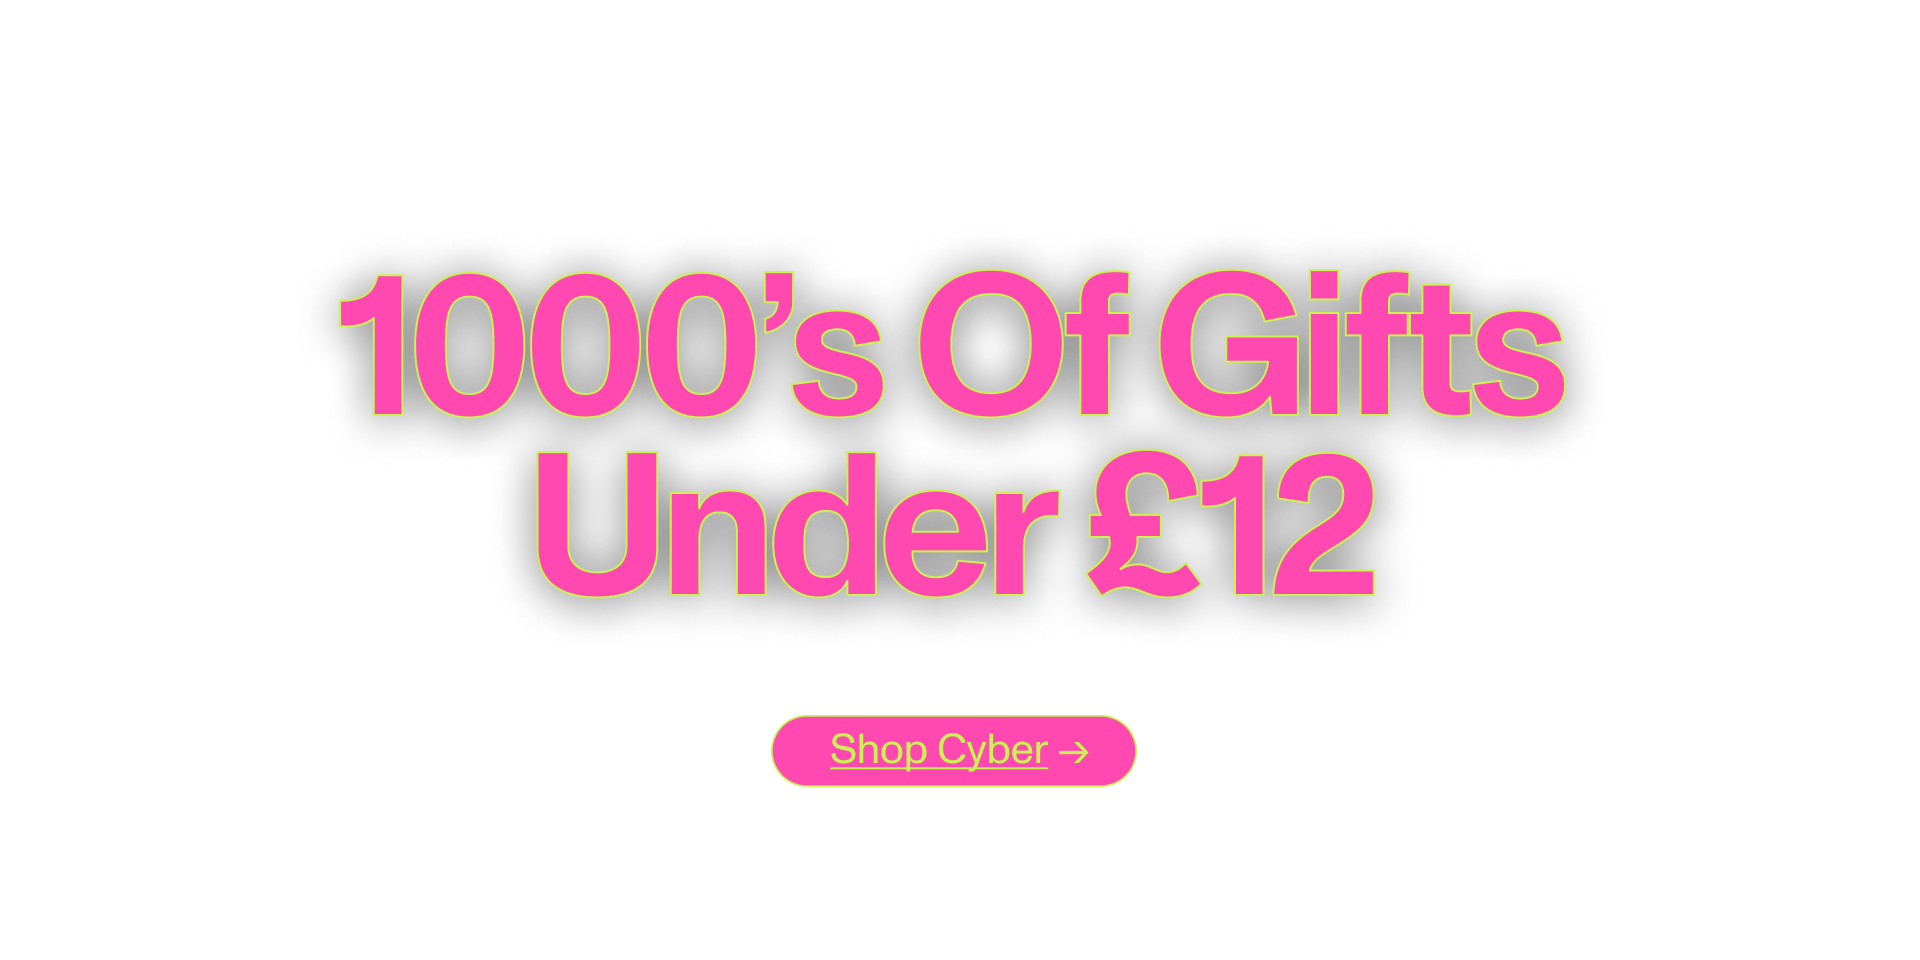 1000s Of Gifts Under £12. Shop Cyber.